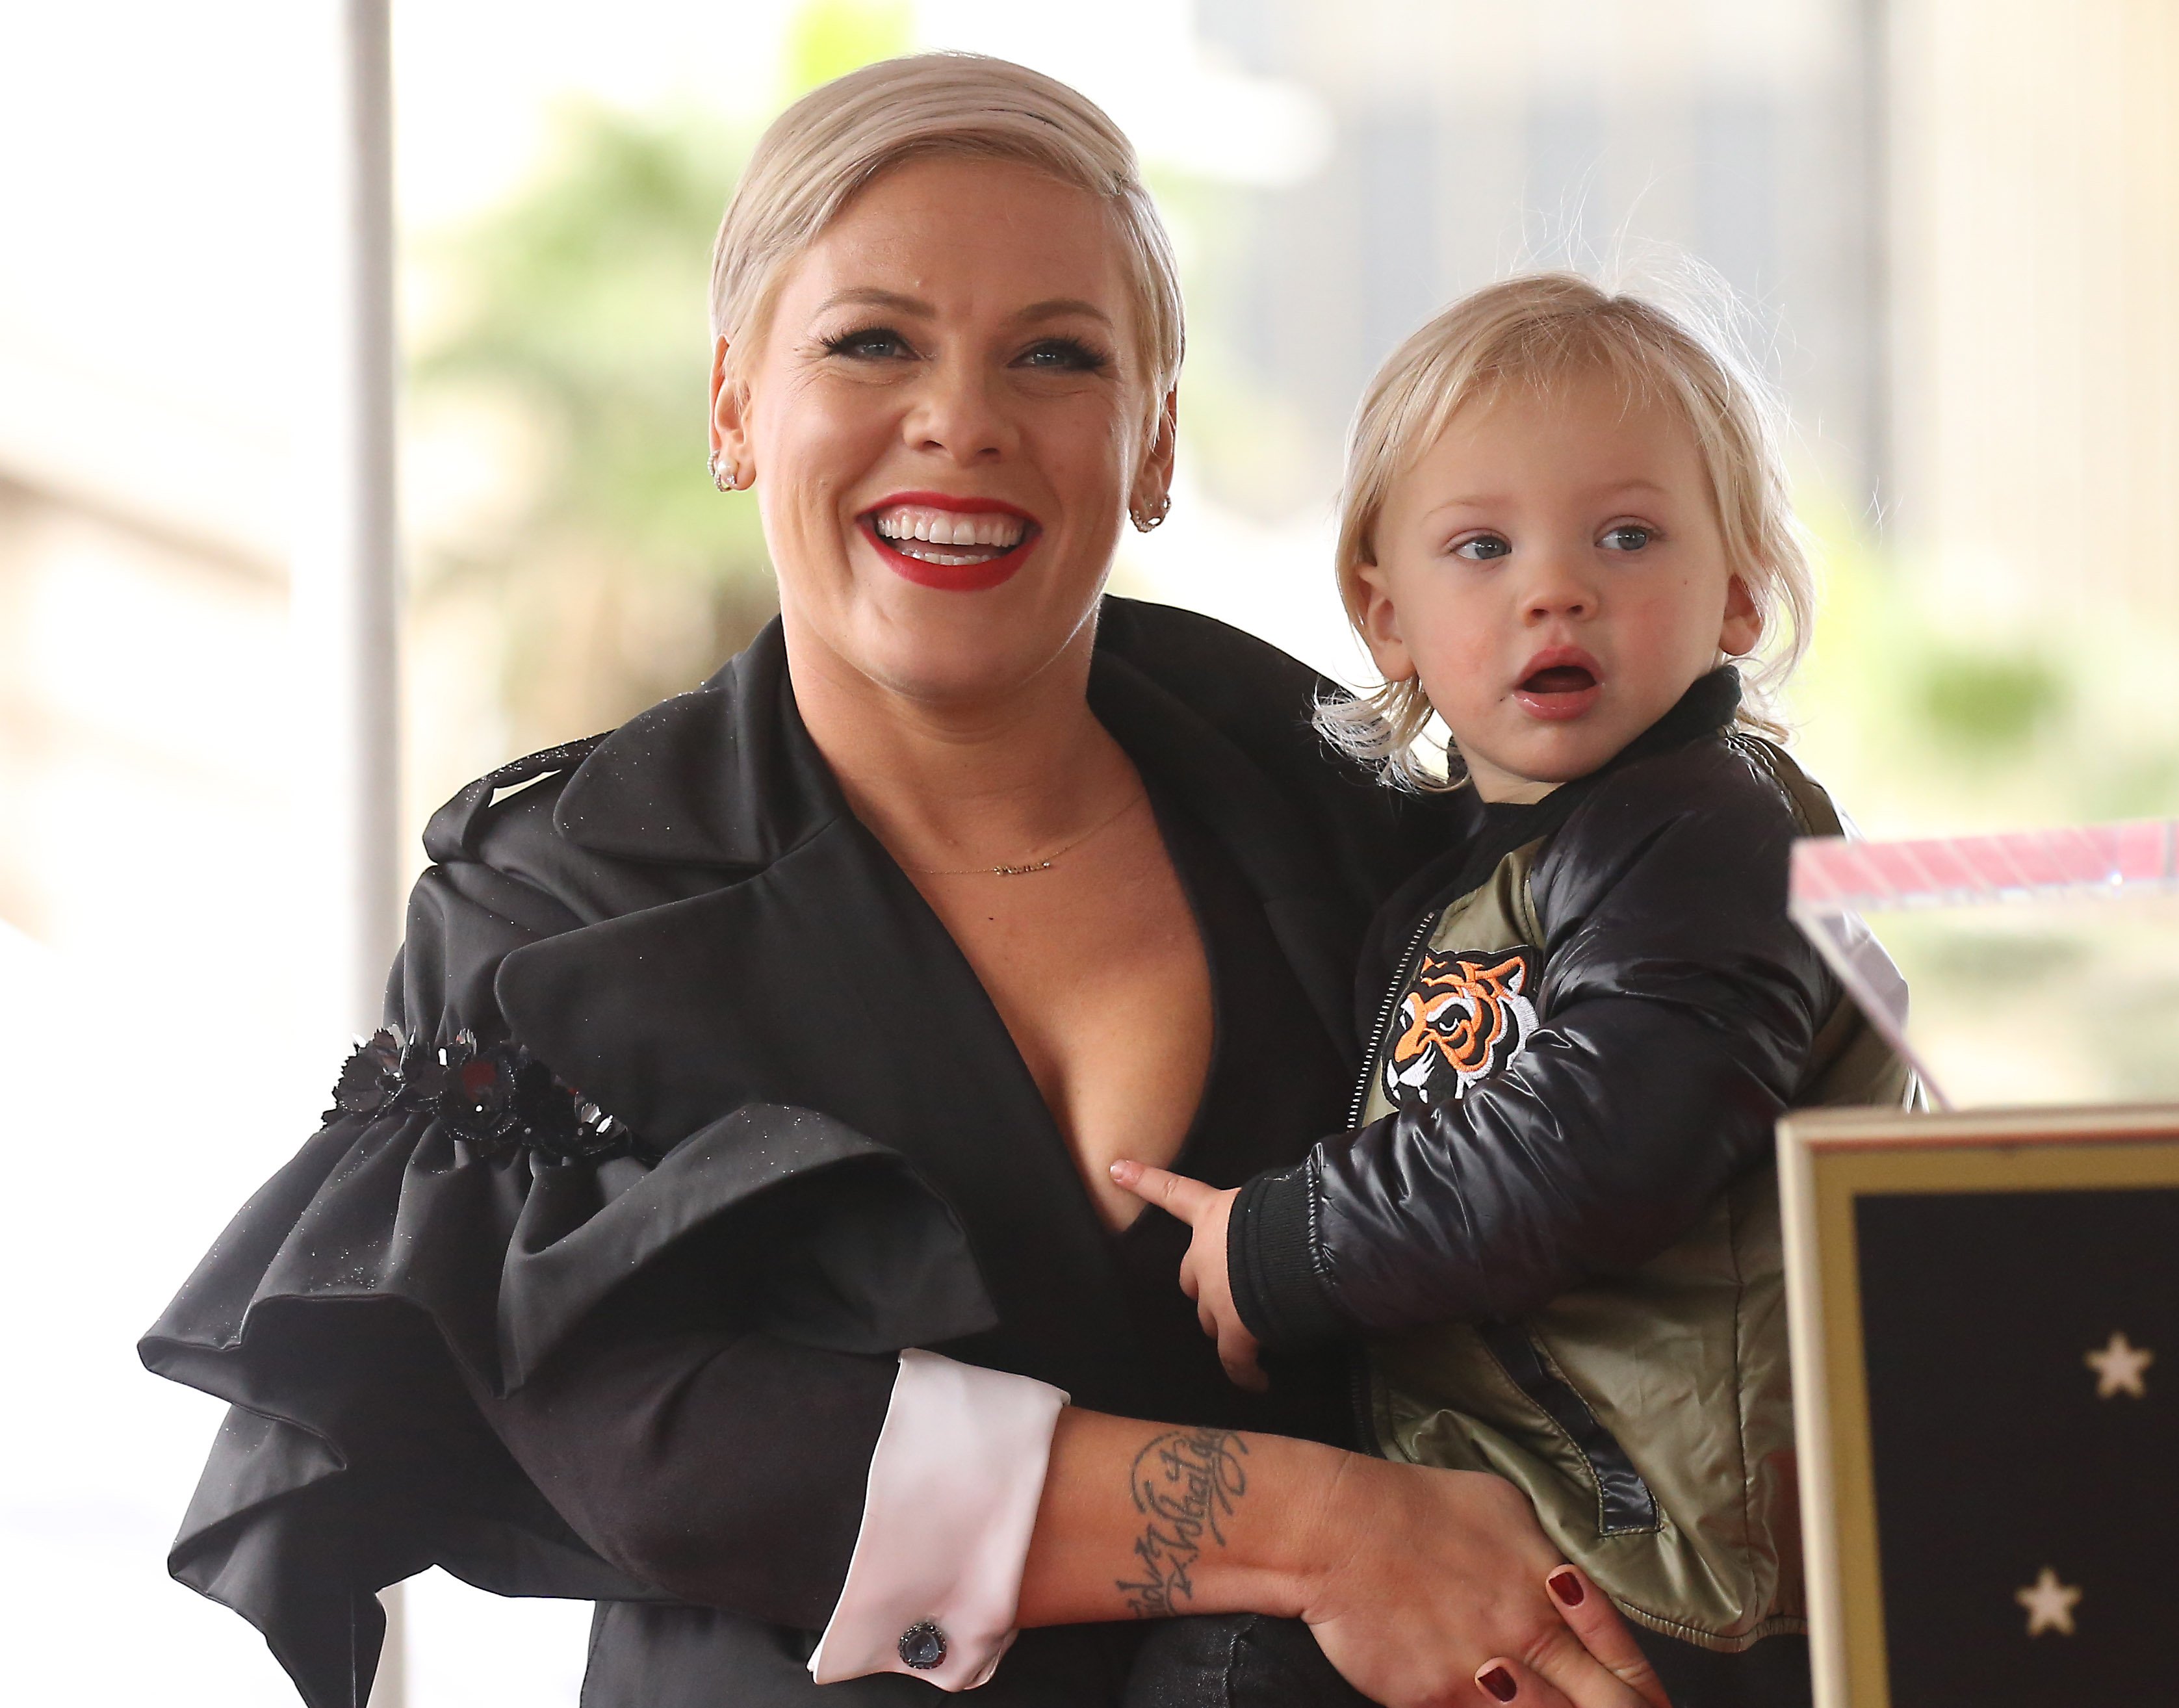 Alecia Beth Moore, aka Pink, and her son Jameson Hart attend the Hollywood Walk of Fame honoring for the singer in Hollywood, California on February 5, 2019 | Photo: Getty Images